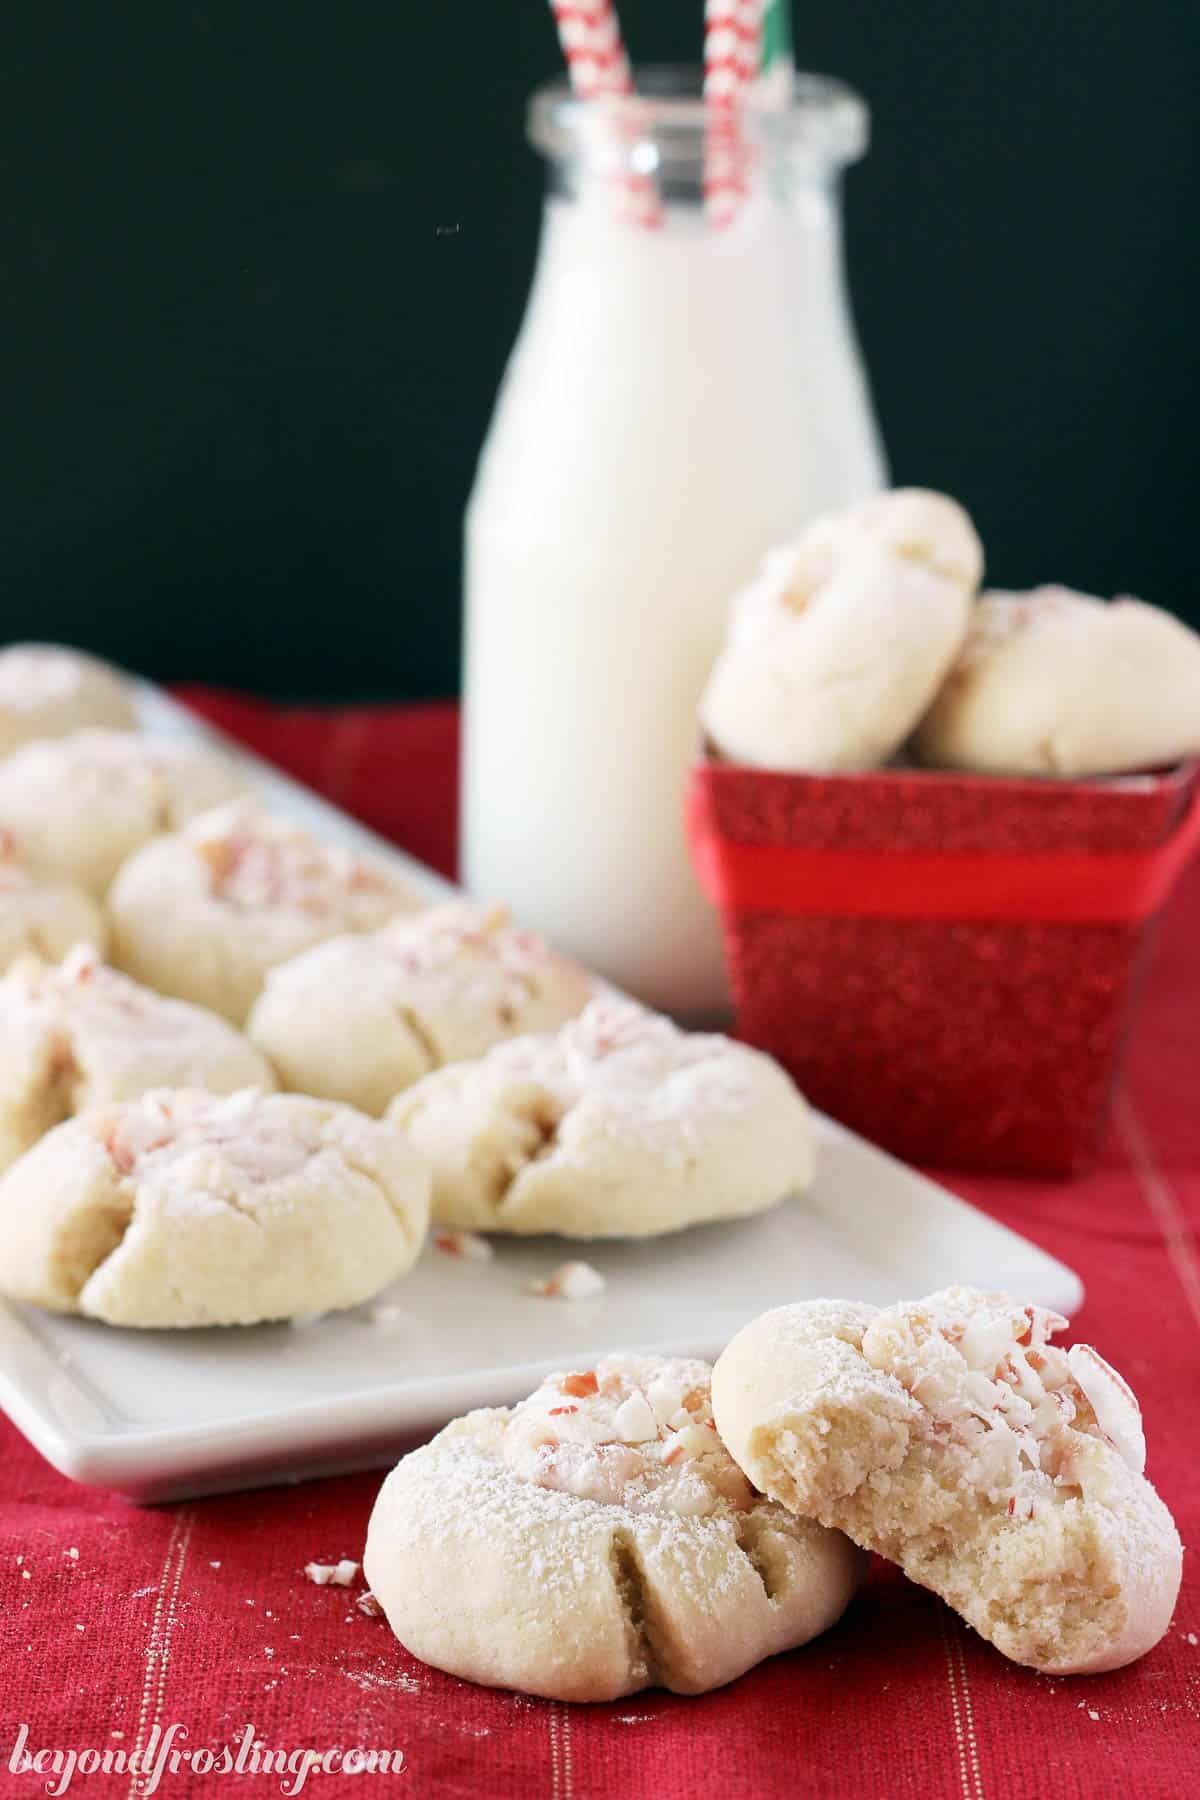 A plate of peppermint thumbprint cookies on a red napkin